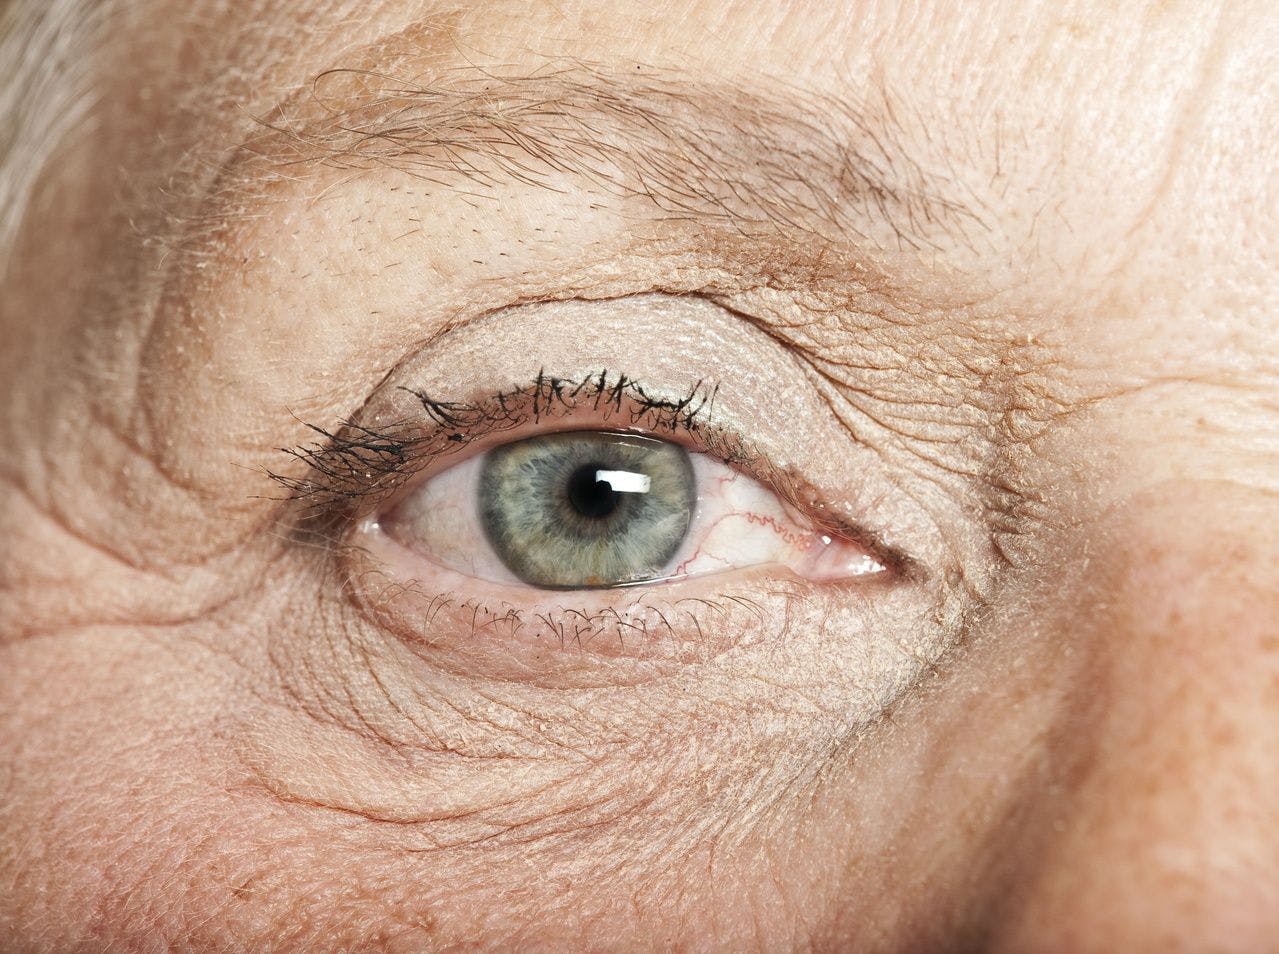 Exercise Reduces Risk of Developing Age-Related Cataracts